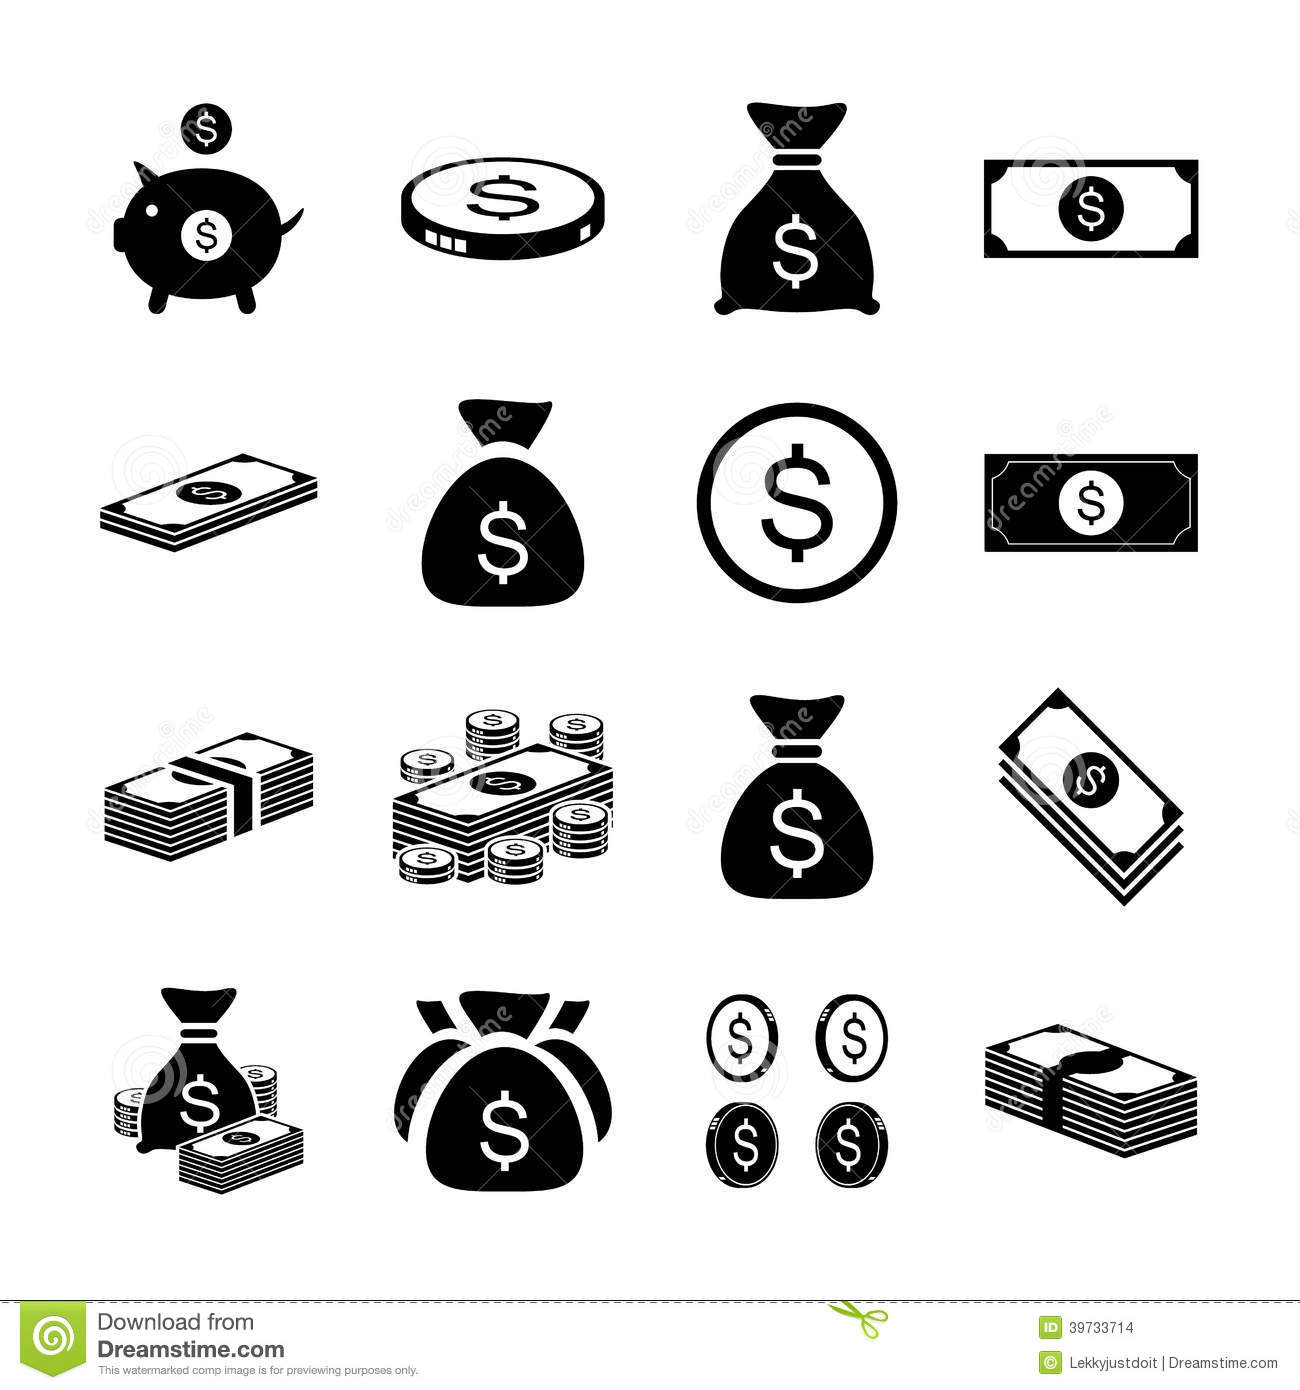 Download Money Icon Vector at Vectorified.com | Collection of Money ...